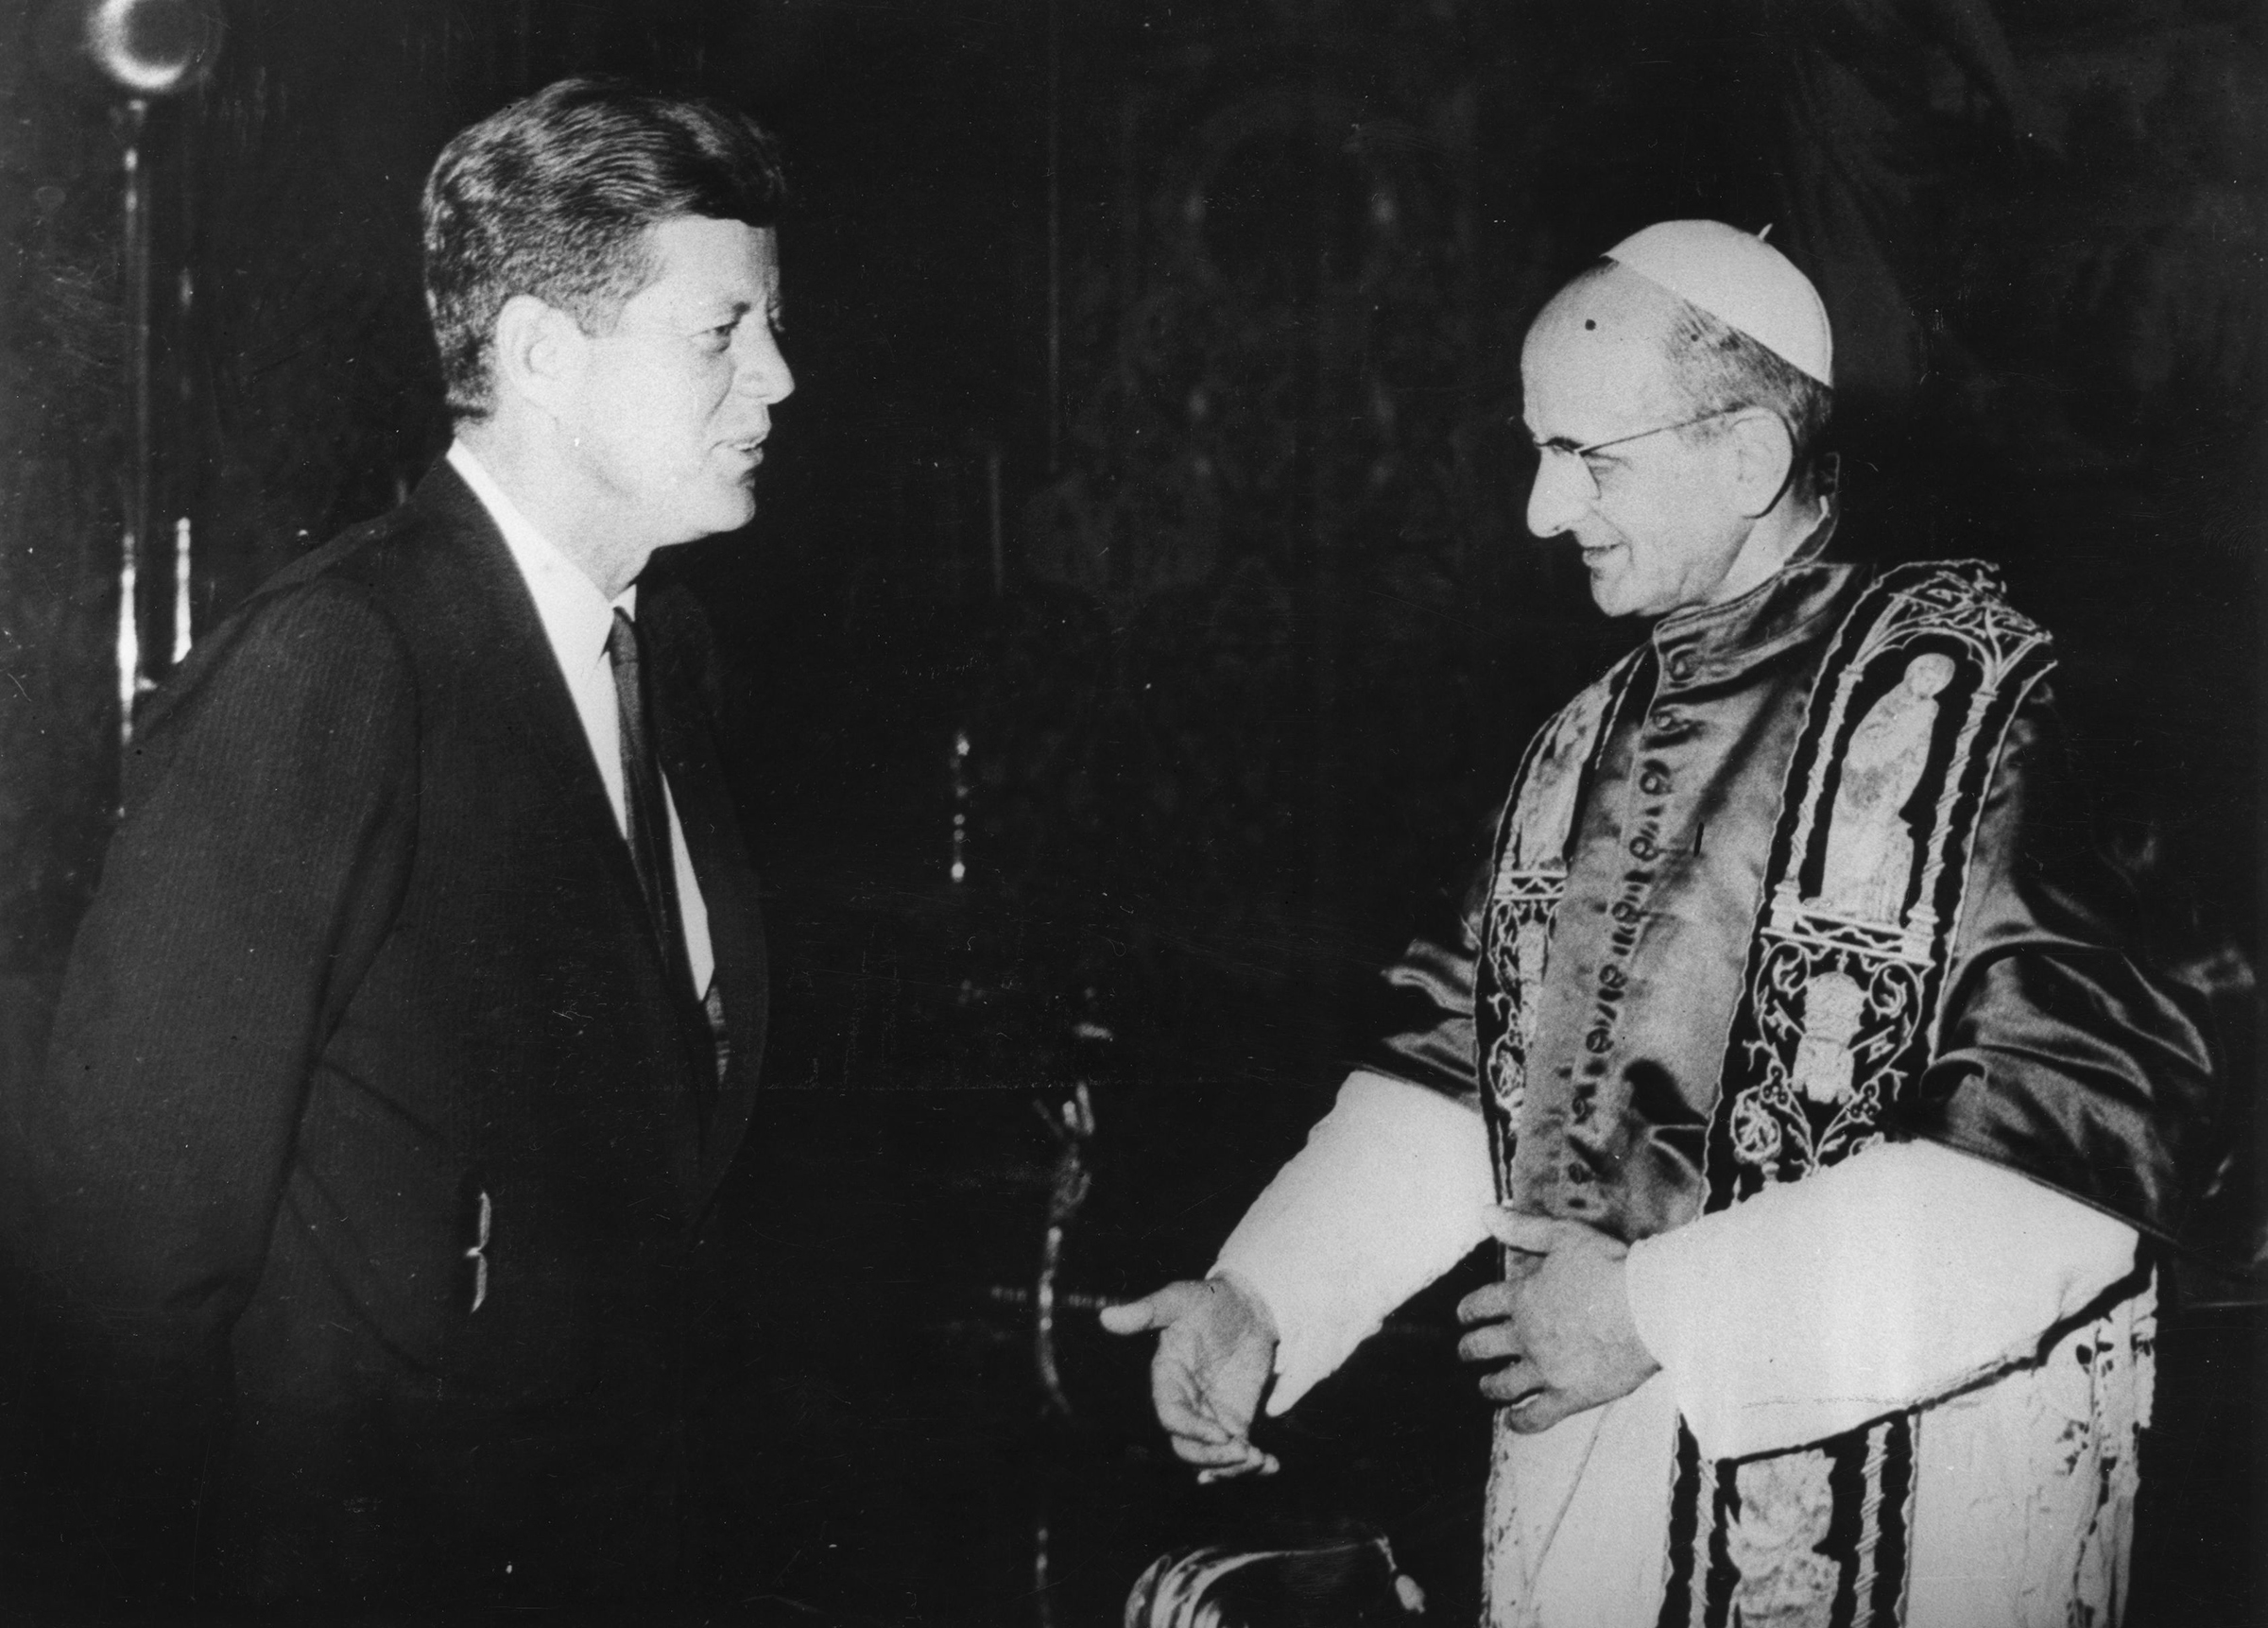 John F. Kennedy, the nation’s first Roman Catholic President, greets the newly elected Pope Paul VI at the Vatican in July 1963